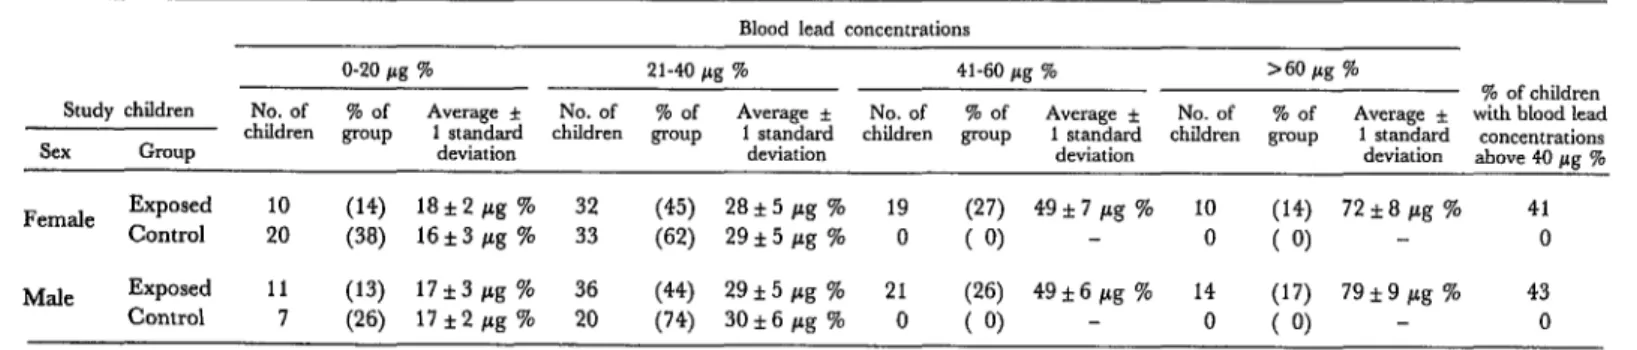 Table  4.  Percentages  of  study  children  with  different  blood  lead  concentrations,  by  sex